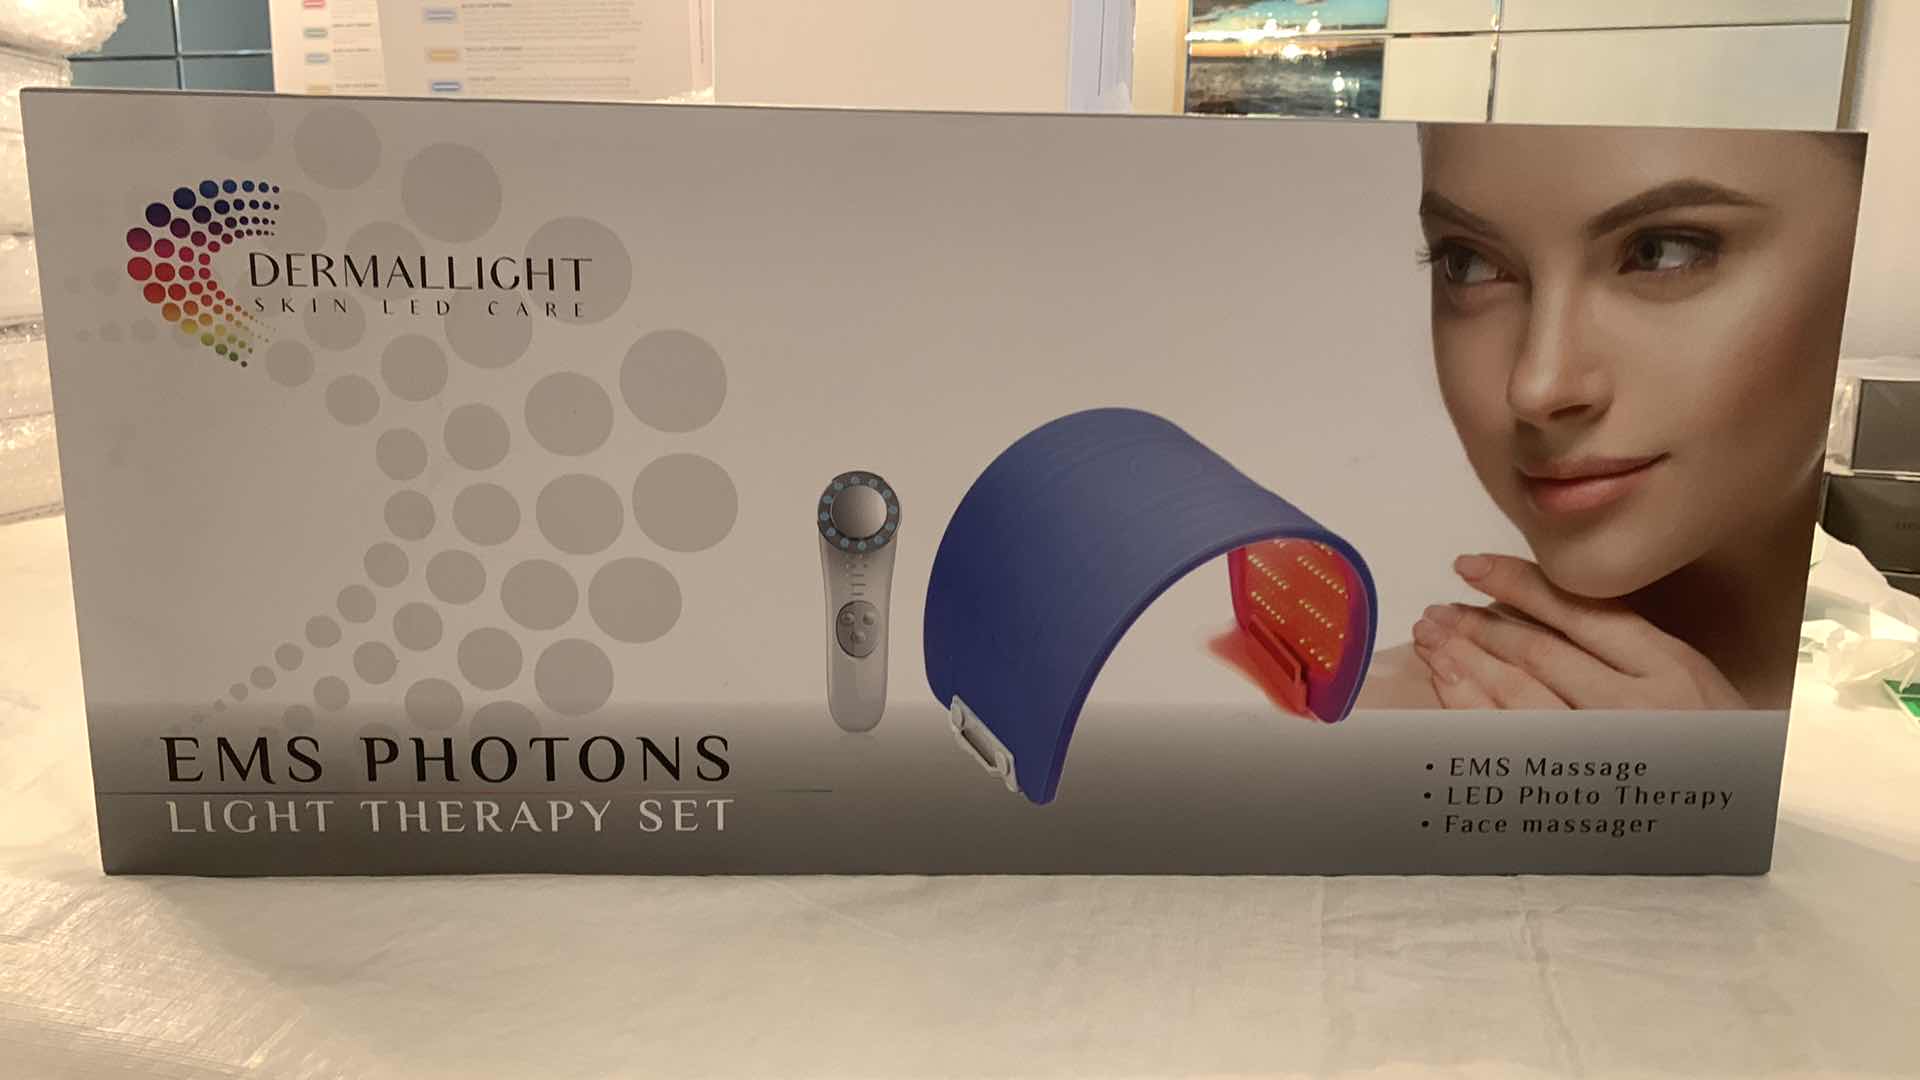 Photo 3 of DERMALLIGHT SKIN LED CARE EMS PHOTONS LIGHT THERAPY SET $2,500